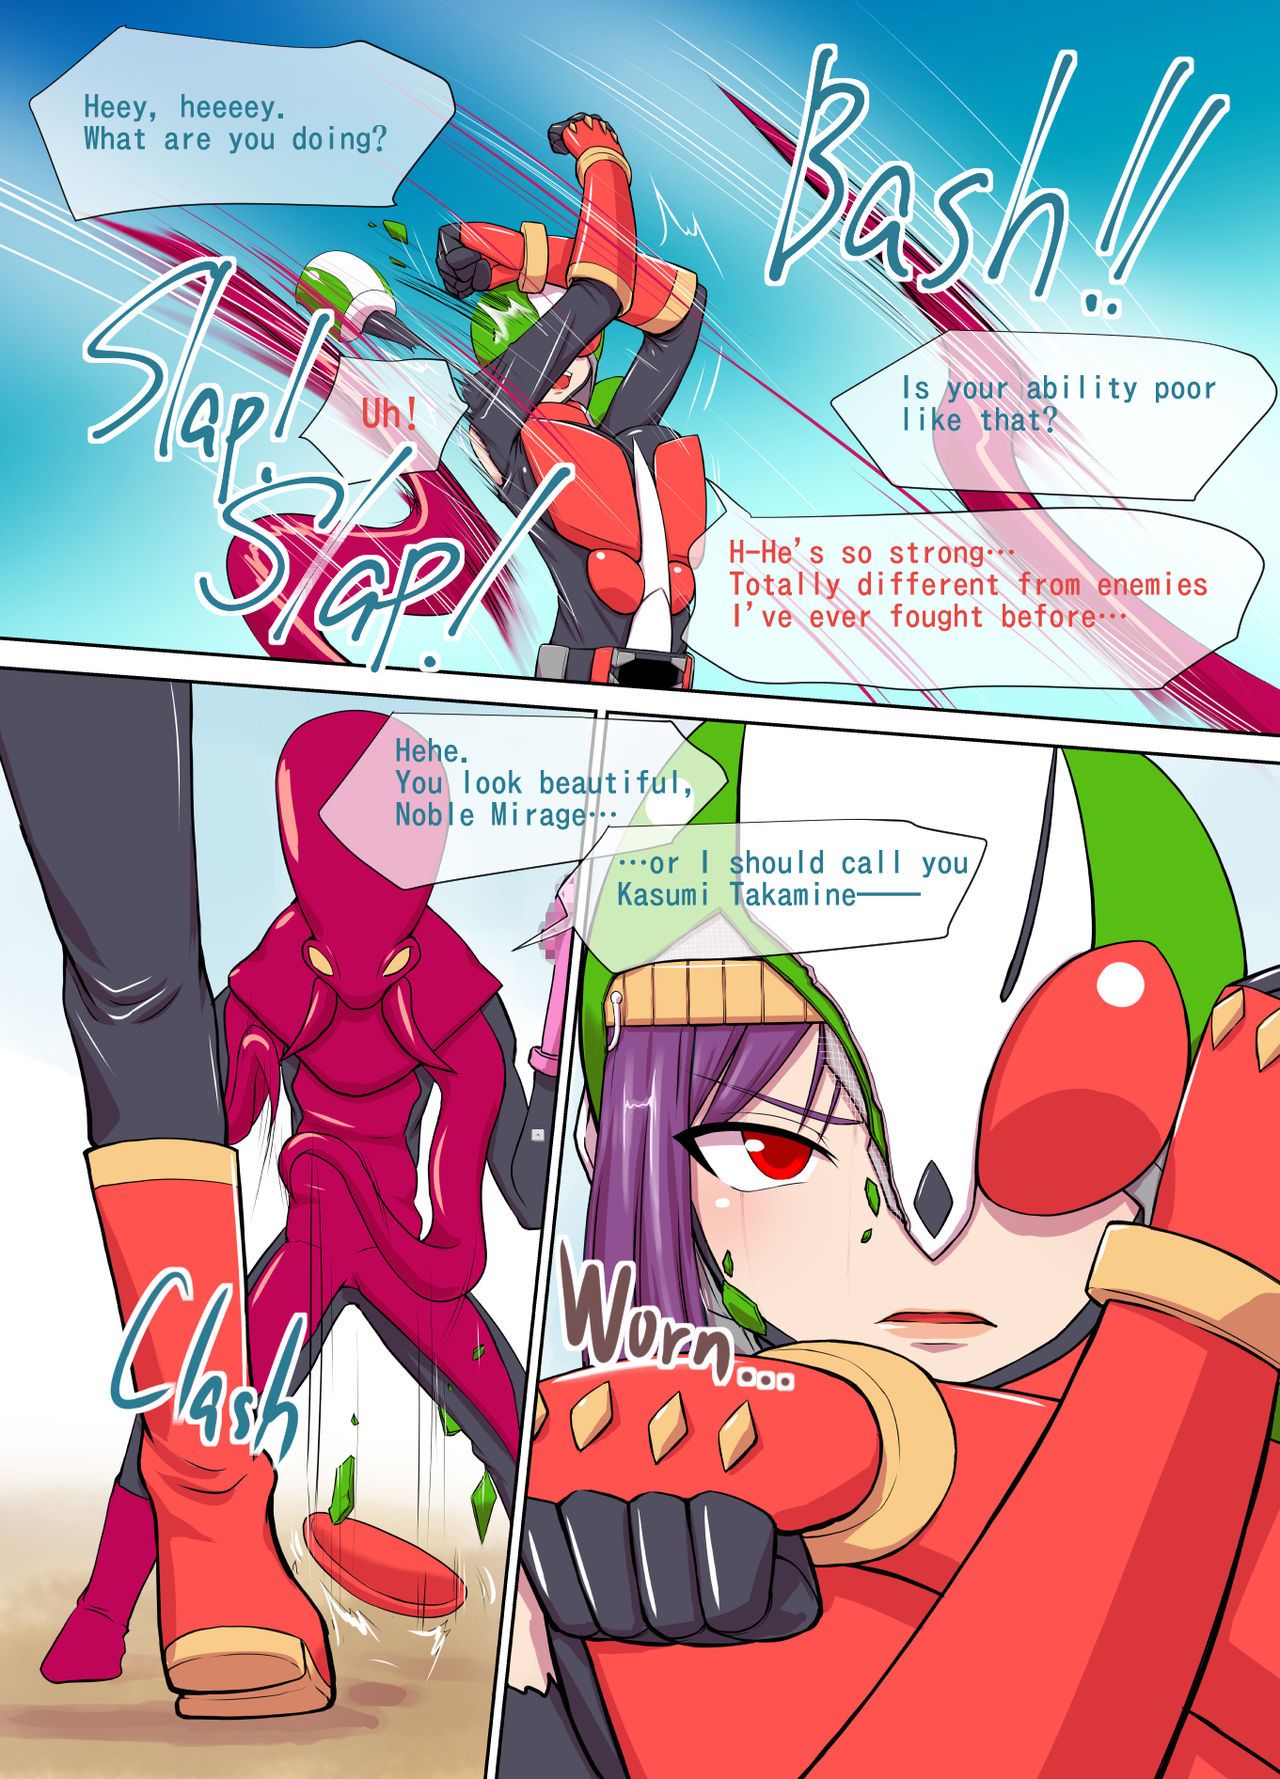 [Elephant Jelly] Justice the Rider: Noble Mirage [English Version] 3